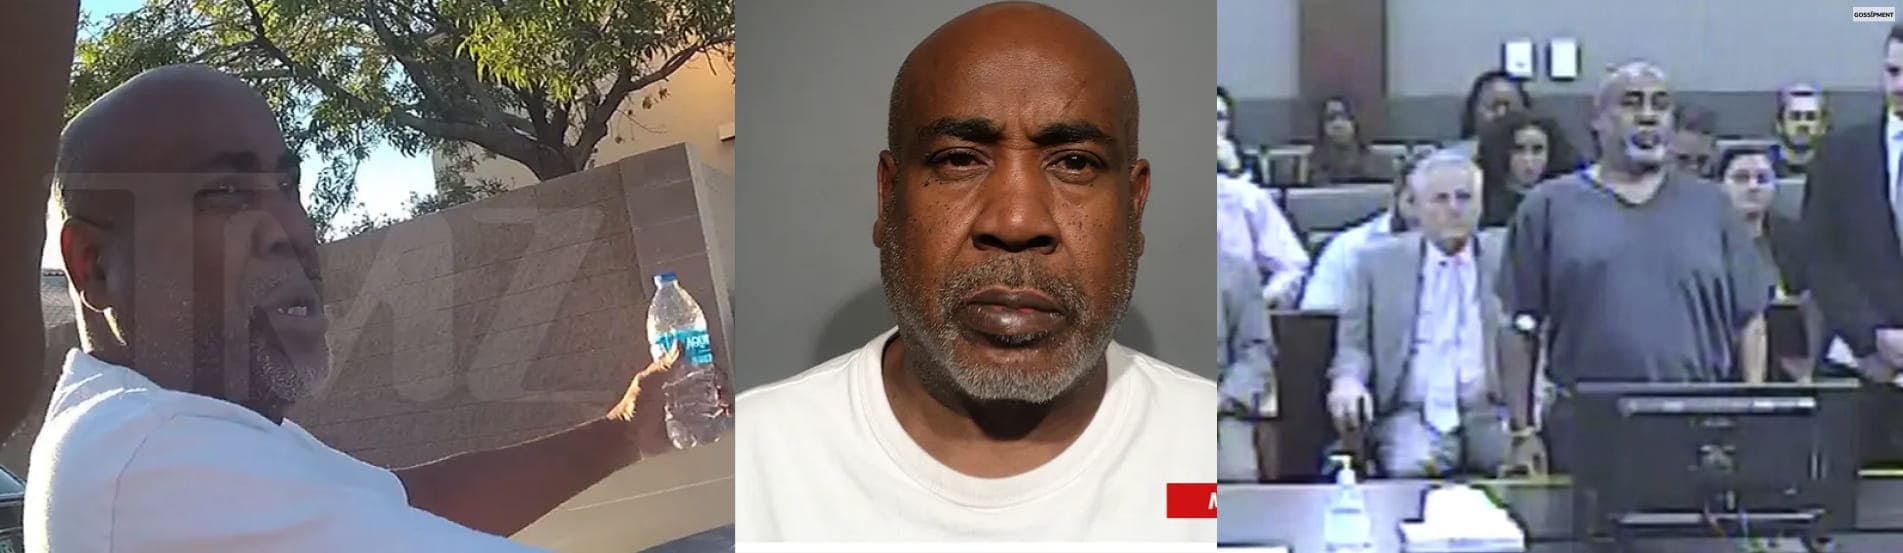 Cover Image for Tupac Shakur Murder Suspect Arrested By Las Vegas Cops After 30 years